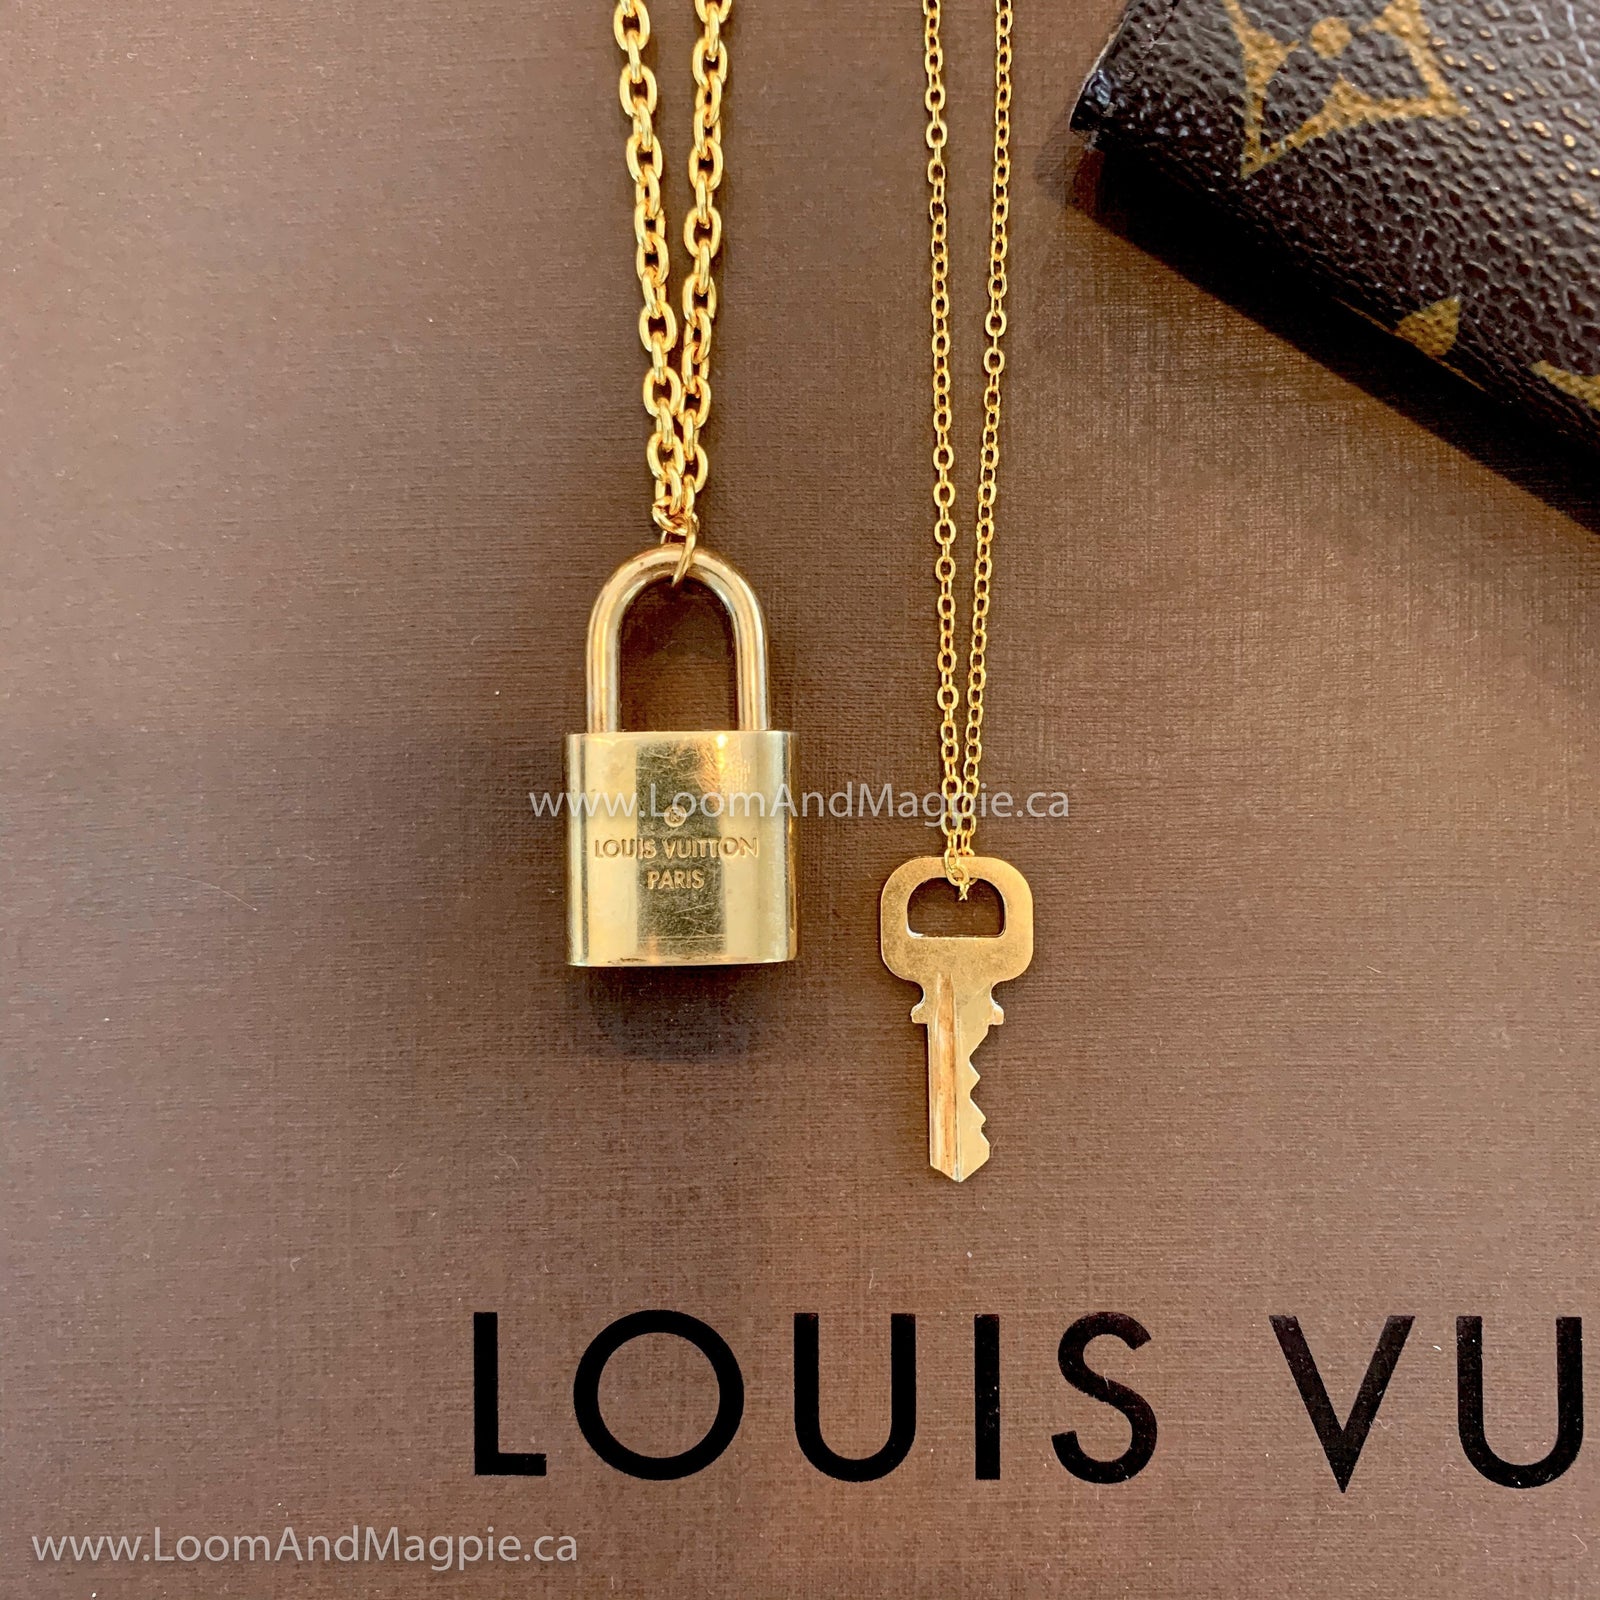 Louis Vuitton with Chain Necklace Loom & Magpie Boutique